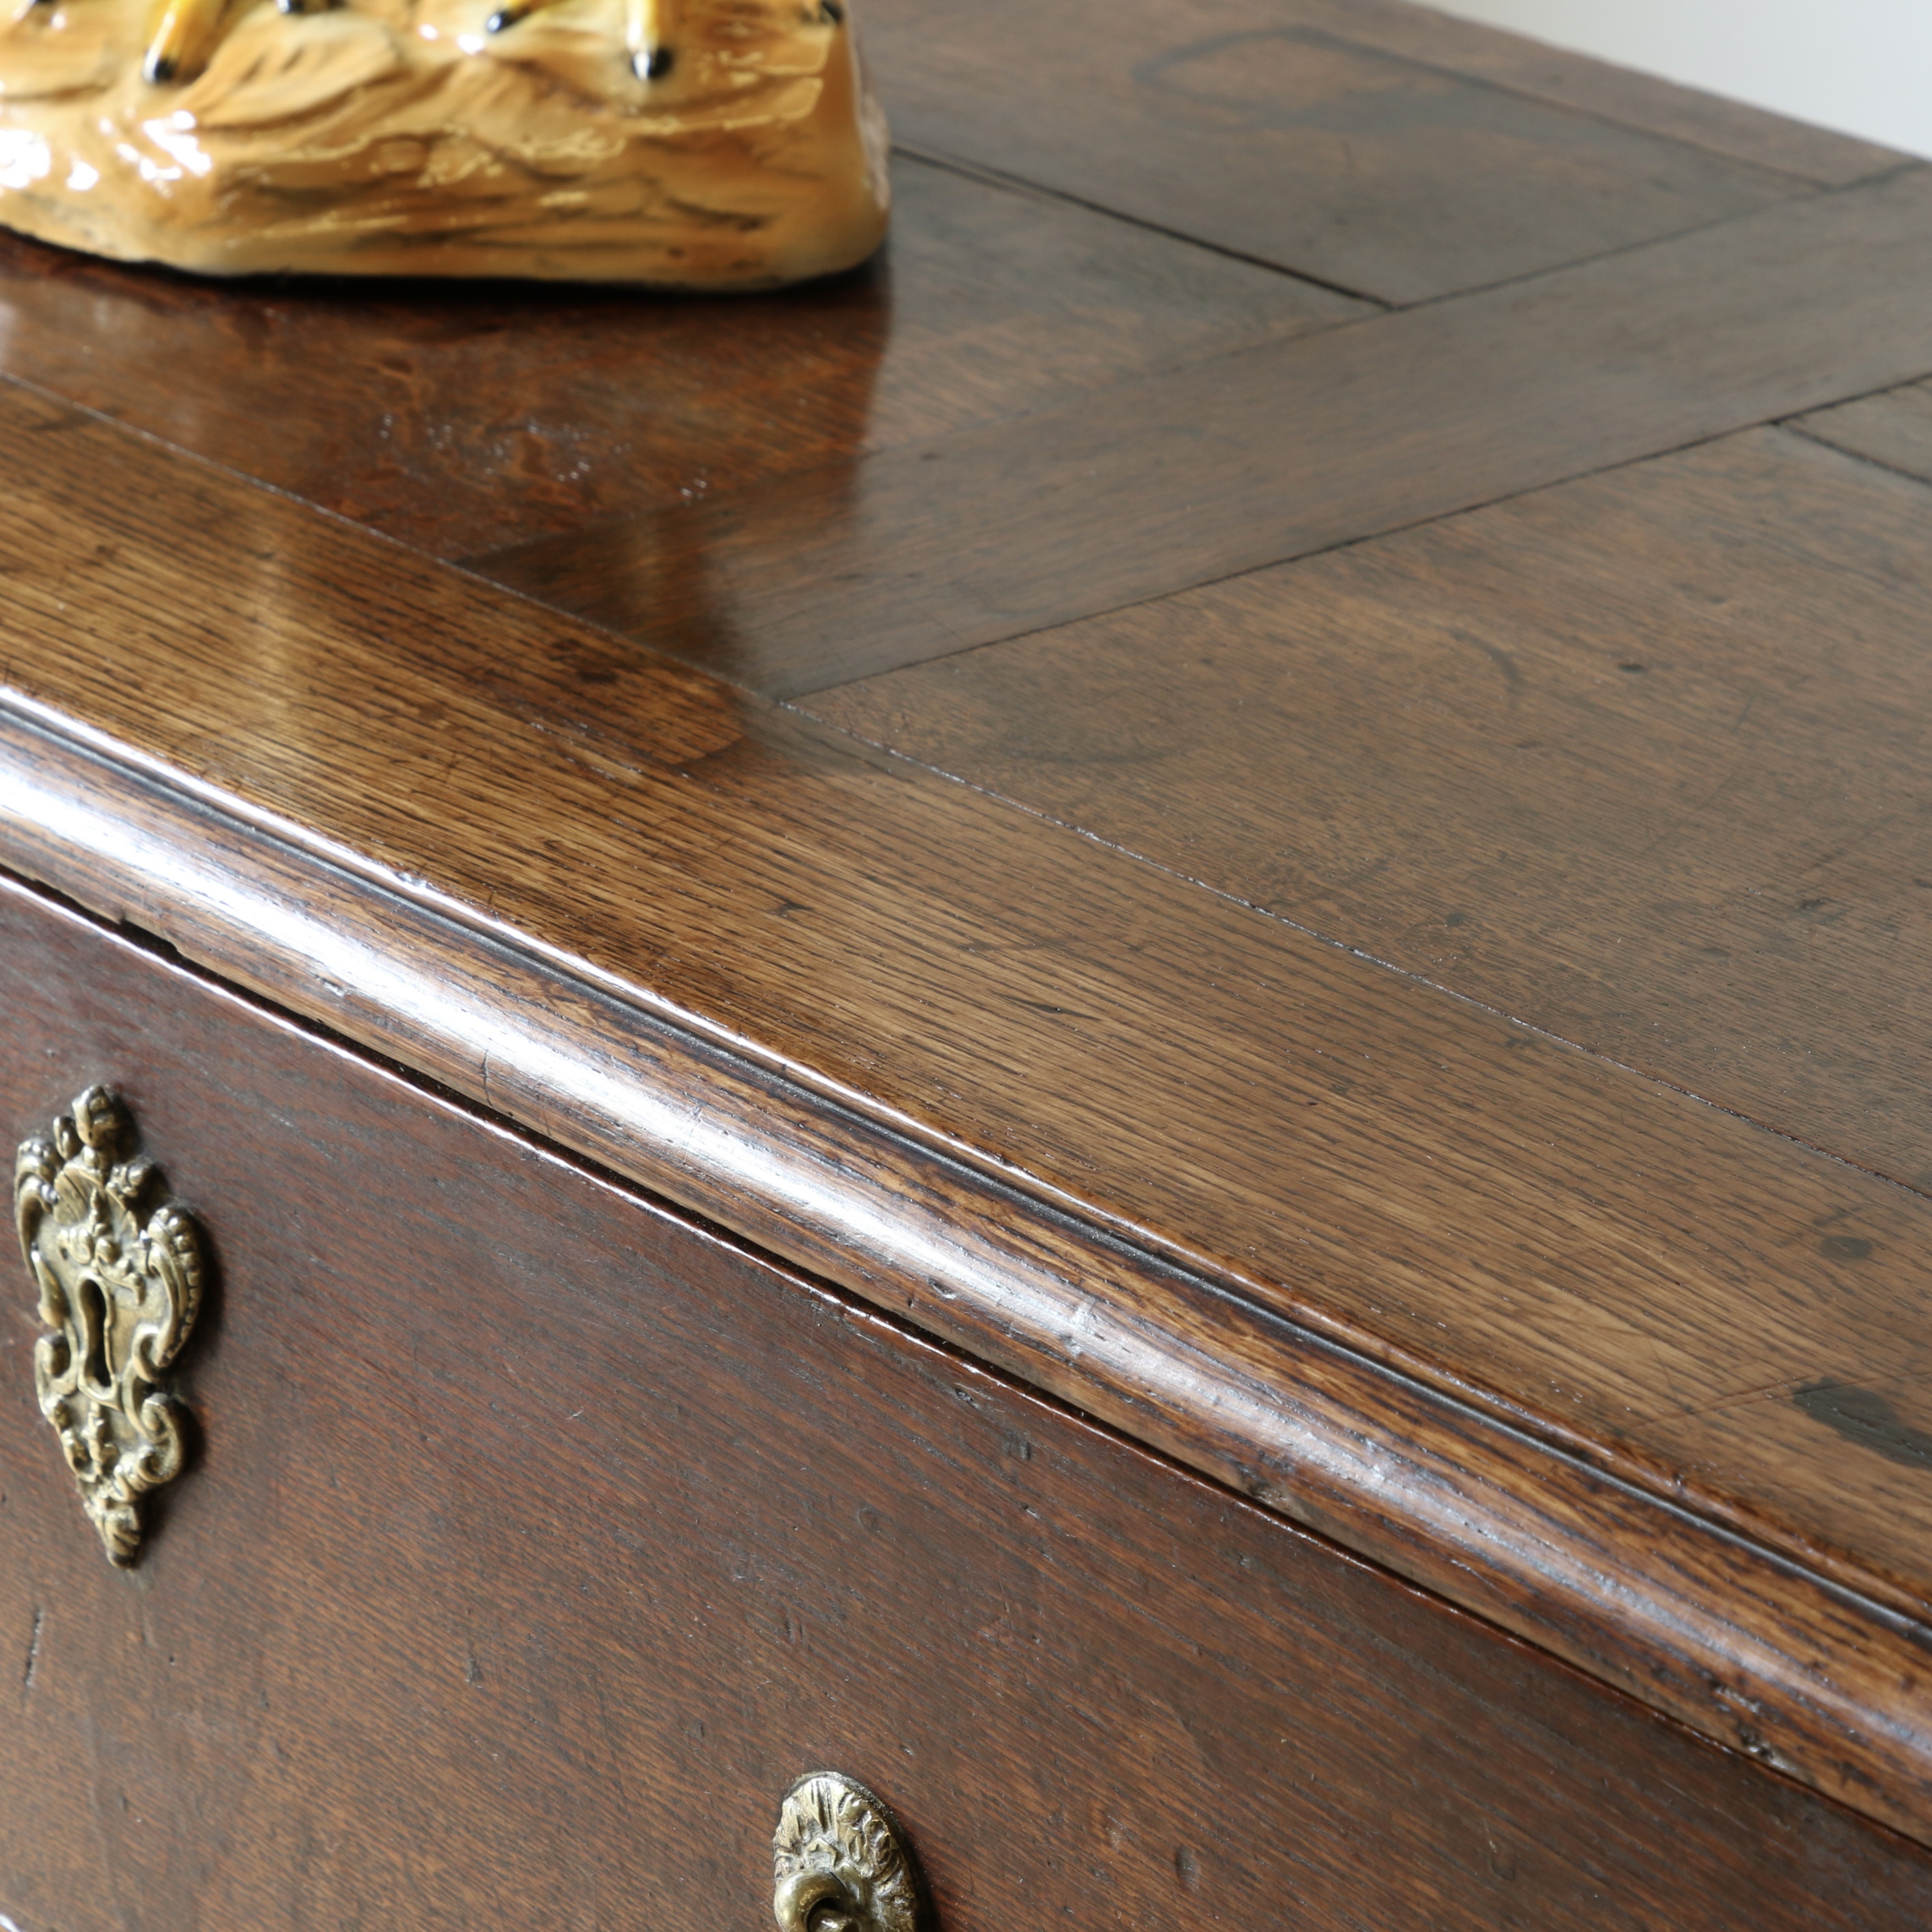 Oak Chest Of Drawers